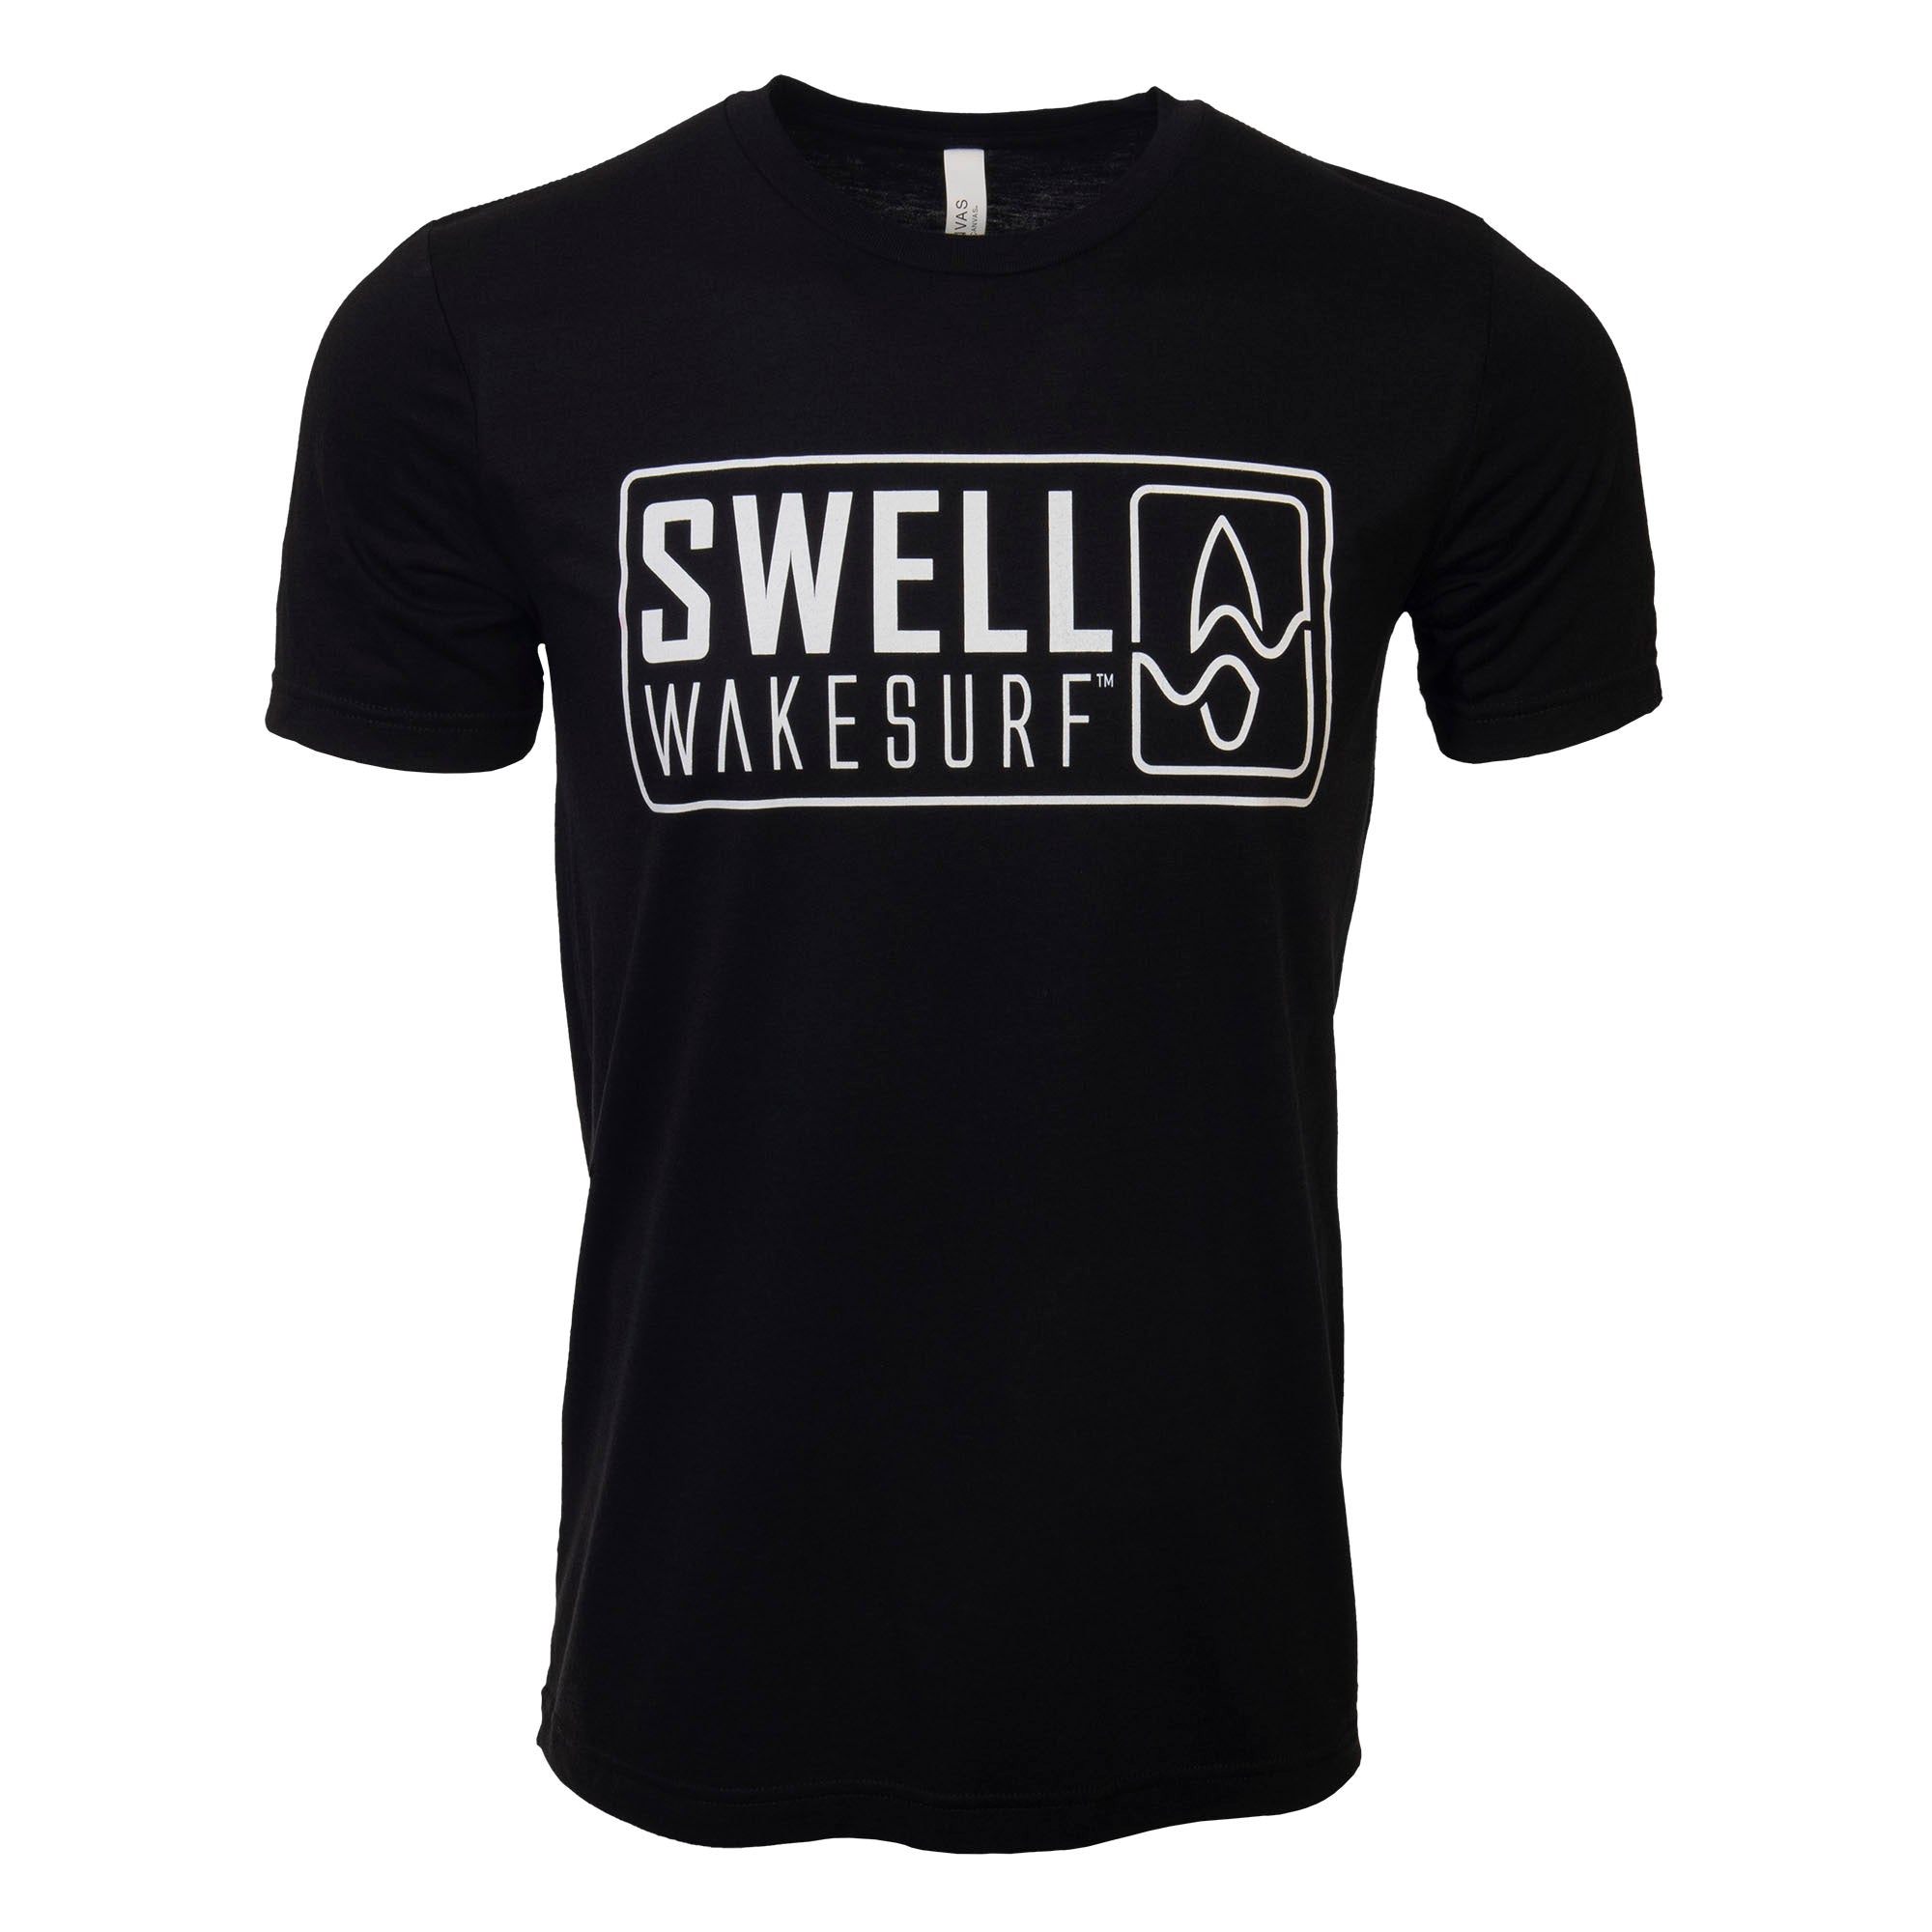 A SWELL Wakesurf Badge Shirt - Men's - Luxuriously Soft Triblend with a screenprinted logo that says SWELL Wakesurf in black.